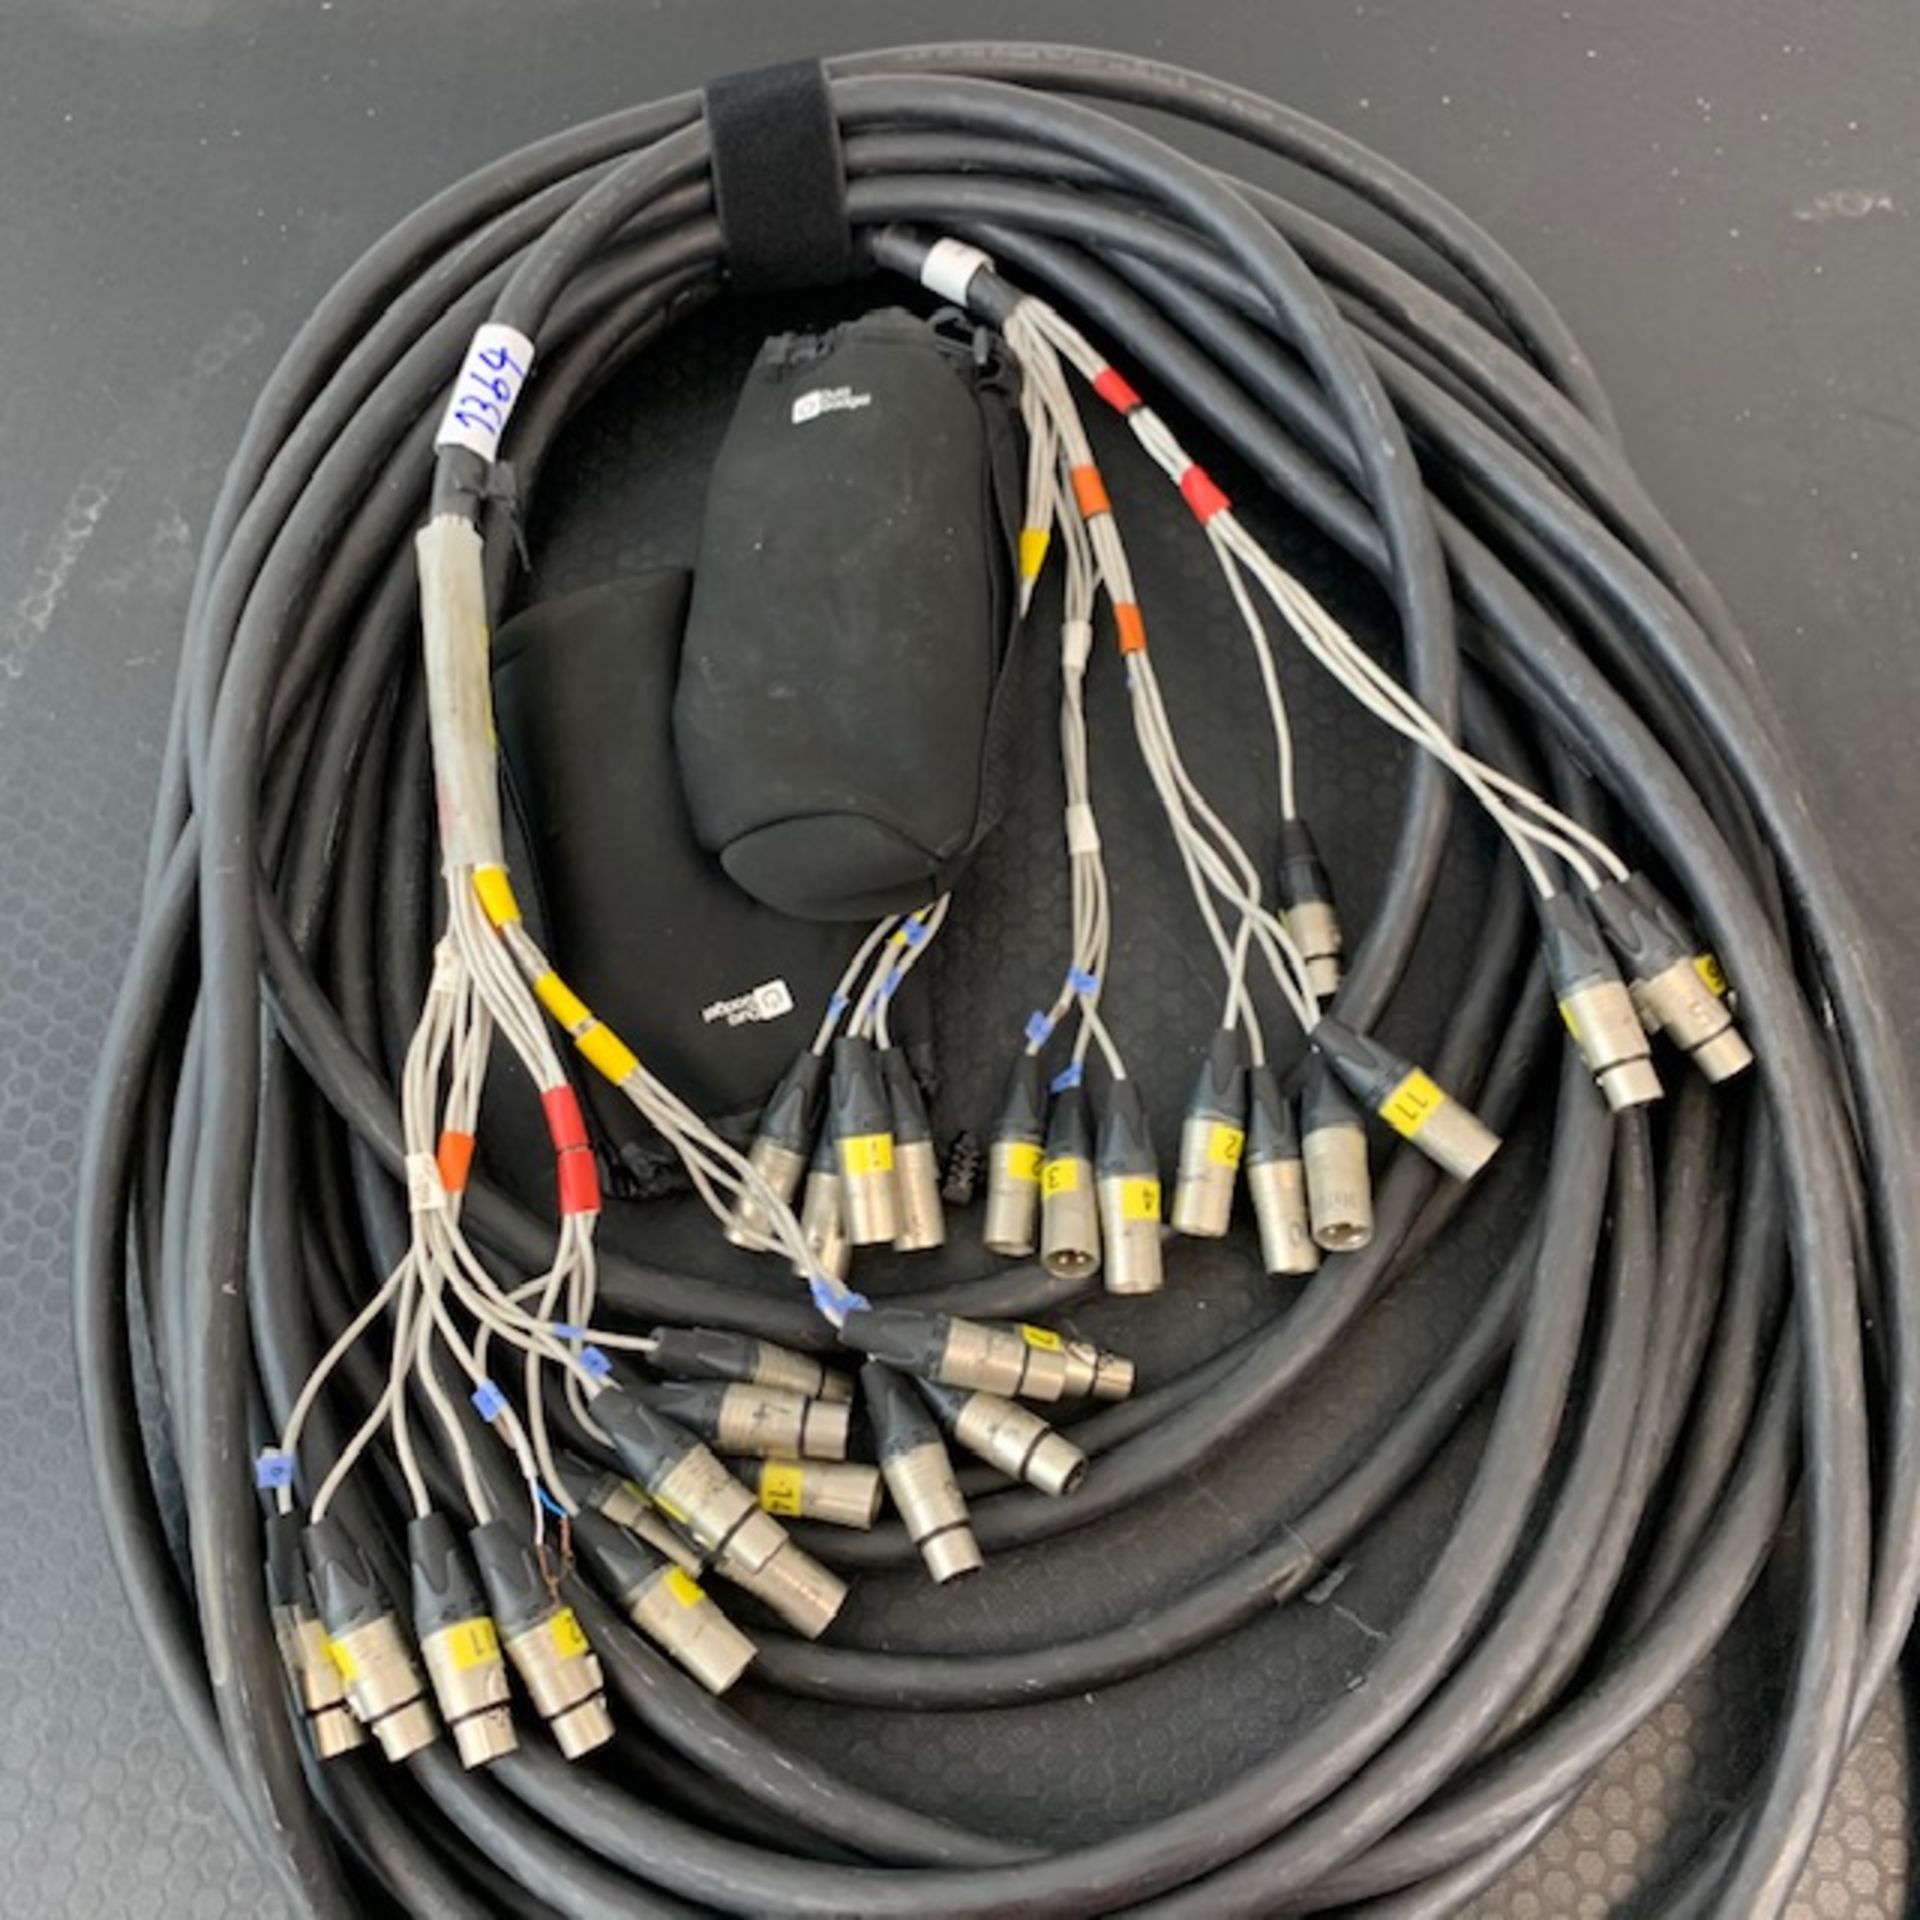 1 X 63Amp 3 Phase 10M Cable - Ref: 1361 - CL581 - Location: Altrincham WA14Items will be available